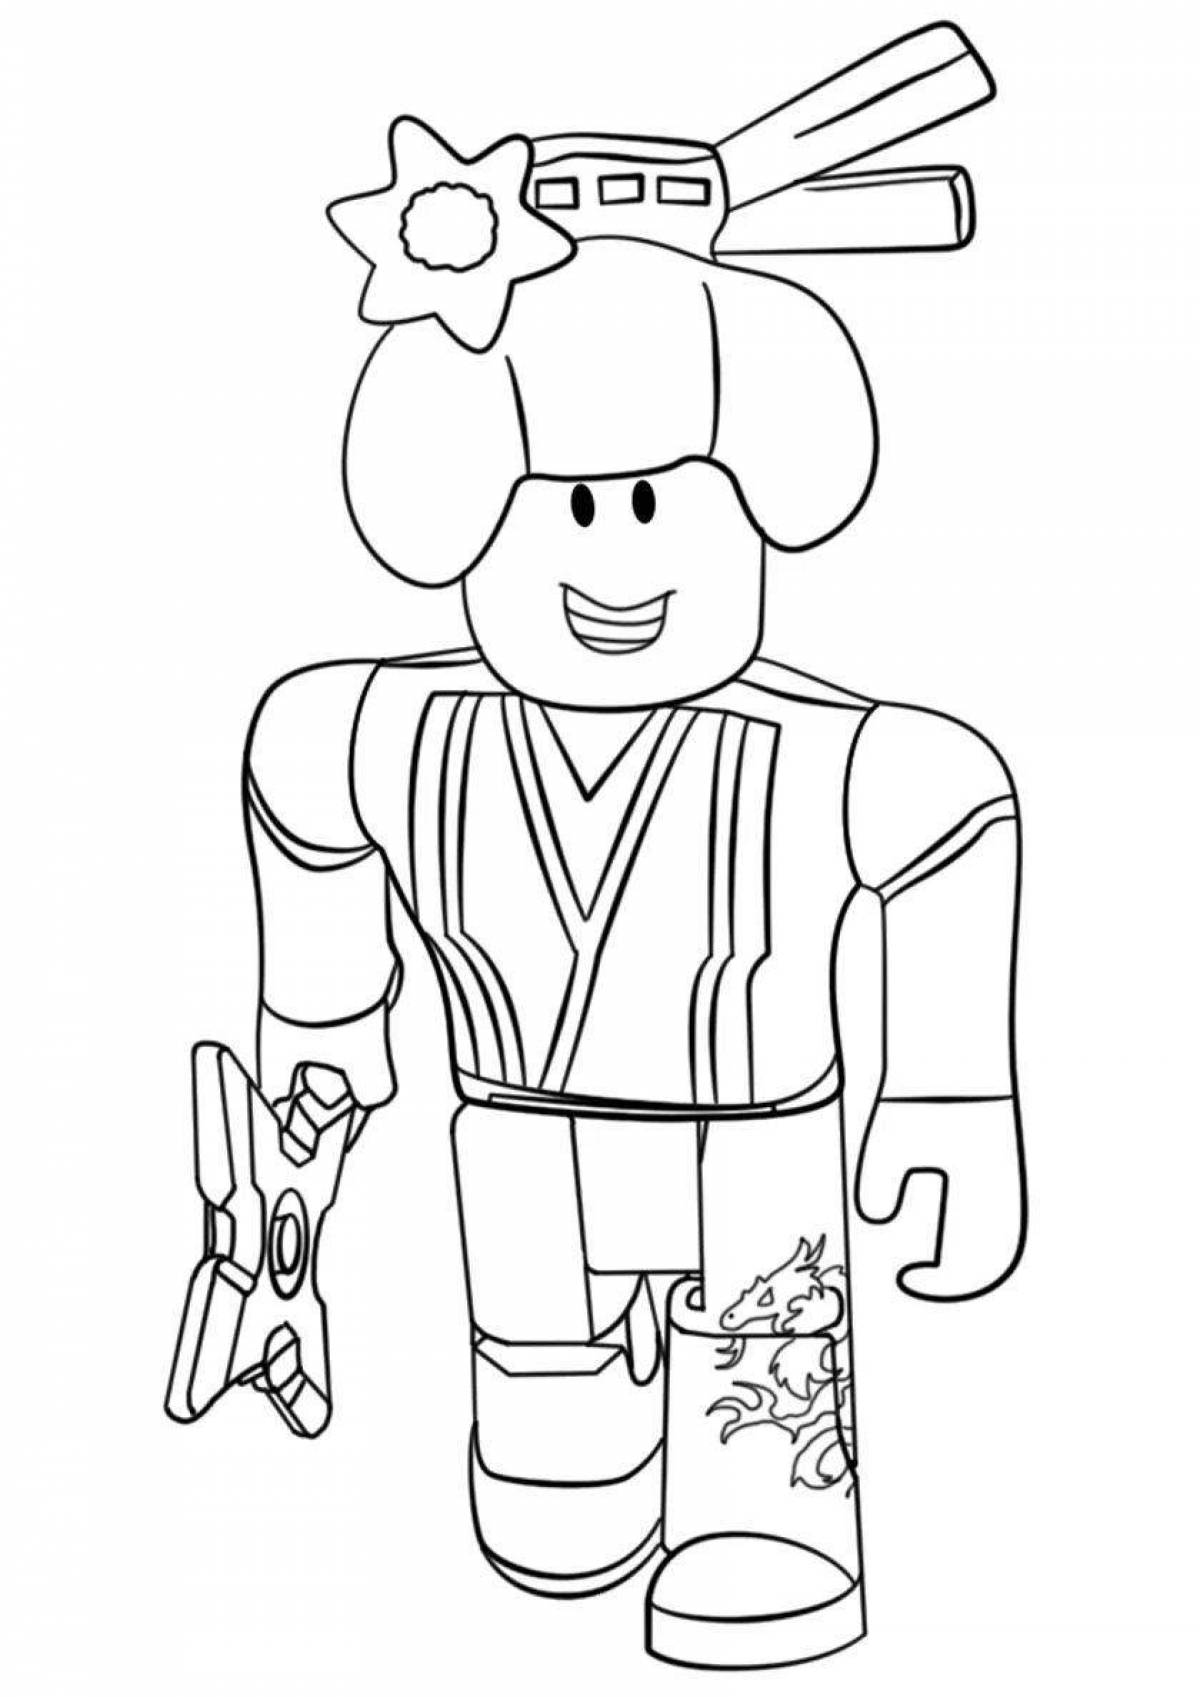 Amazing roblox 3008 coloring page